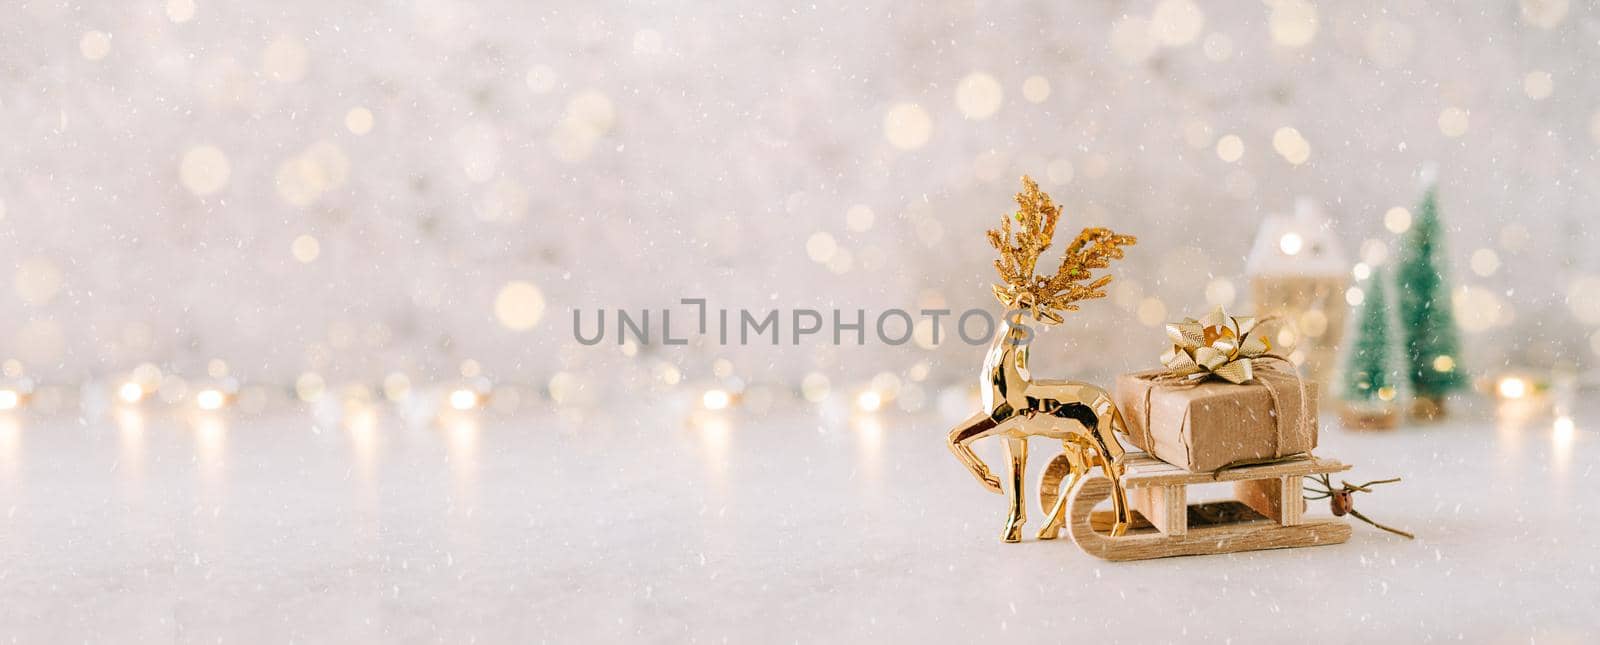 Golden deer dragging Natural Christmas gift on toy wooden sled on white background with glowing light bokeh, copy space. New year card. Xmas decoration, Christmas tree. Banner for design